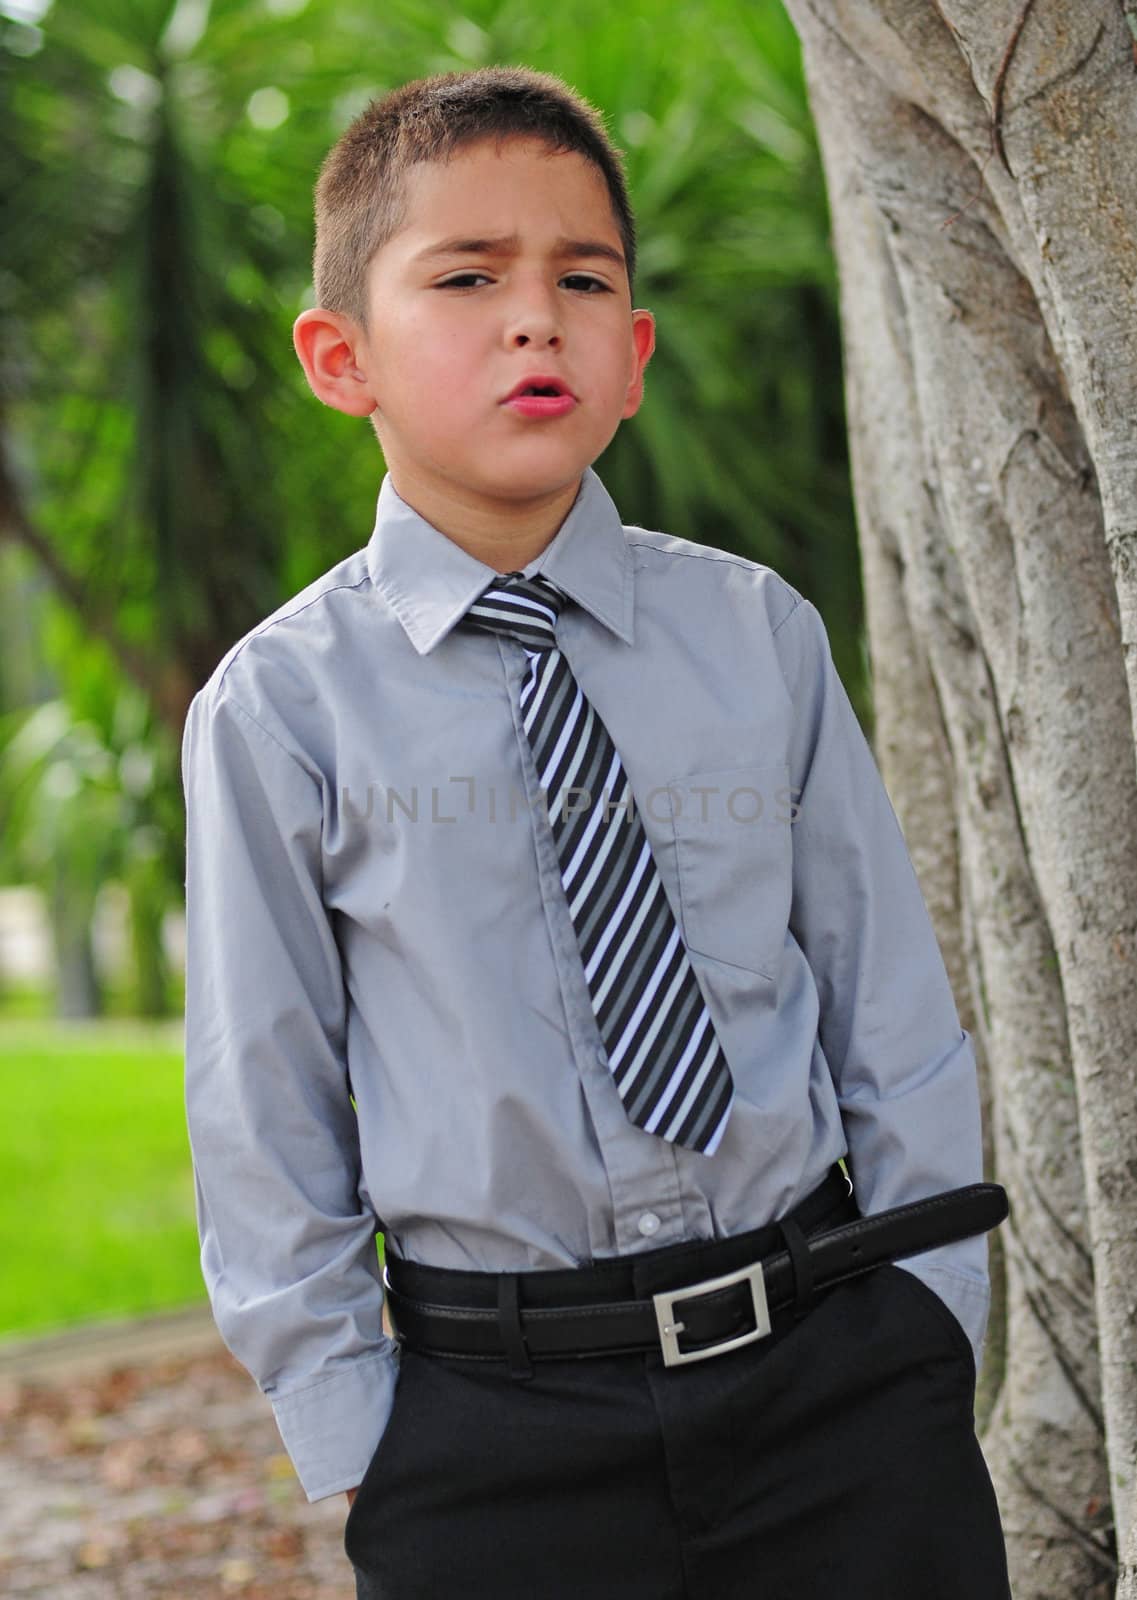 Serious attractive young boy by ftlaudgirl